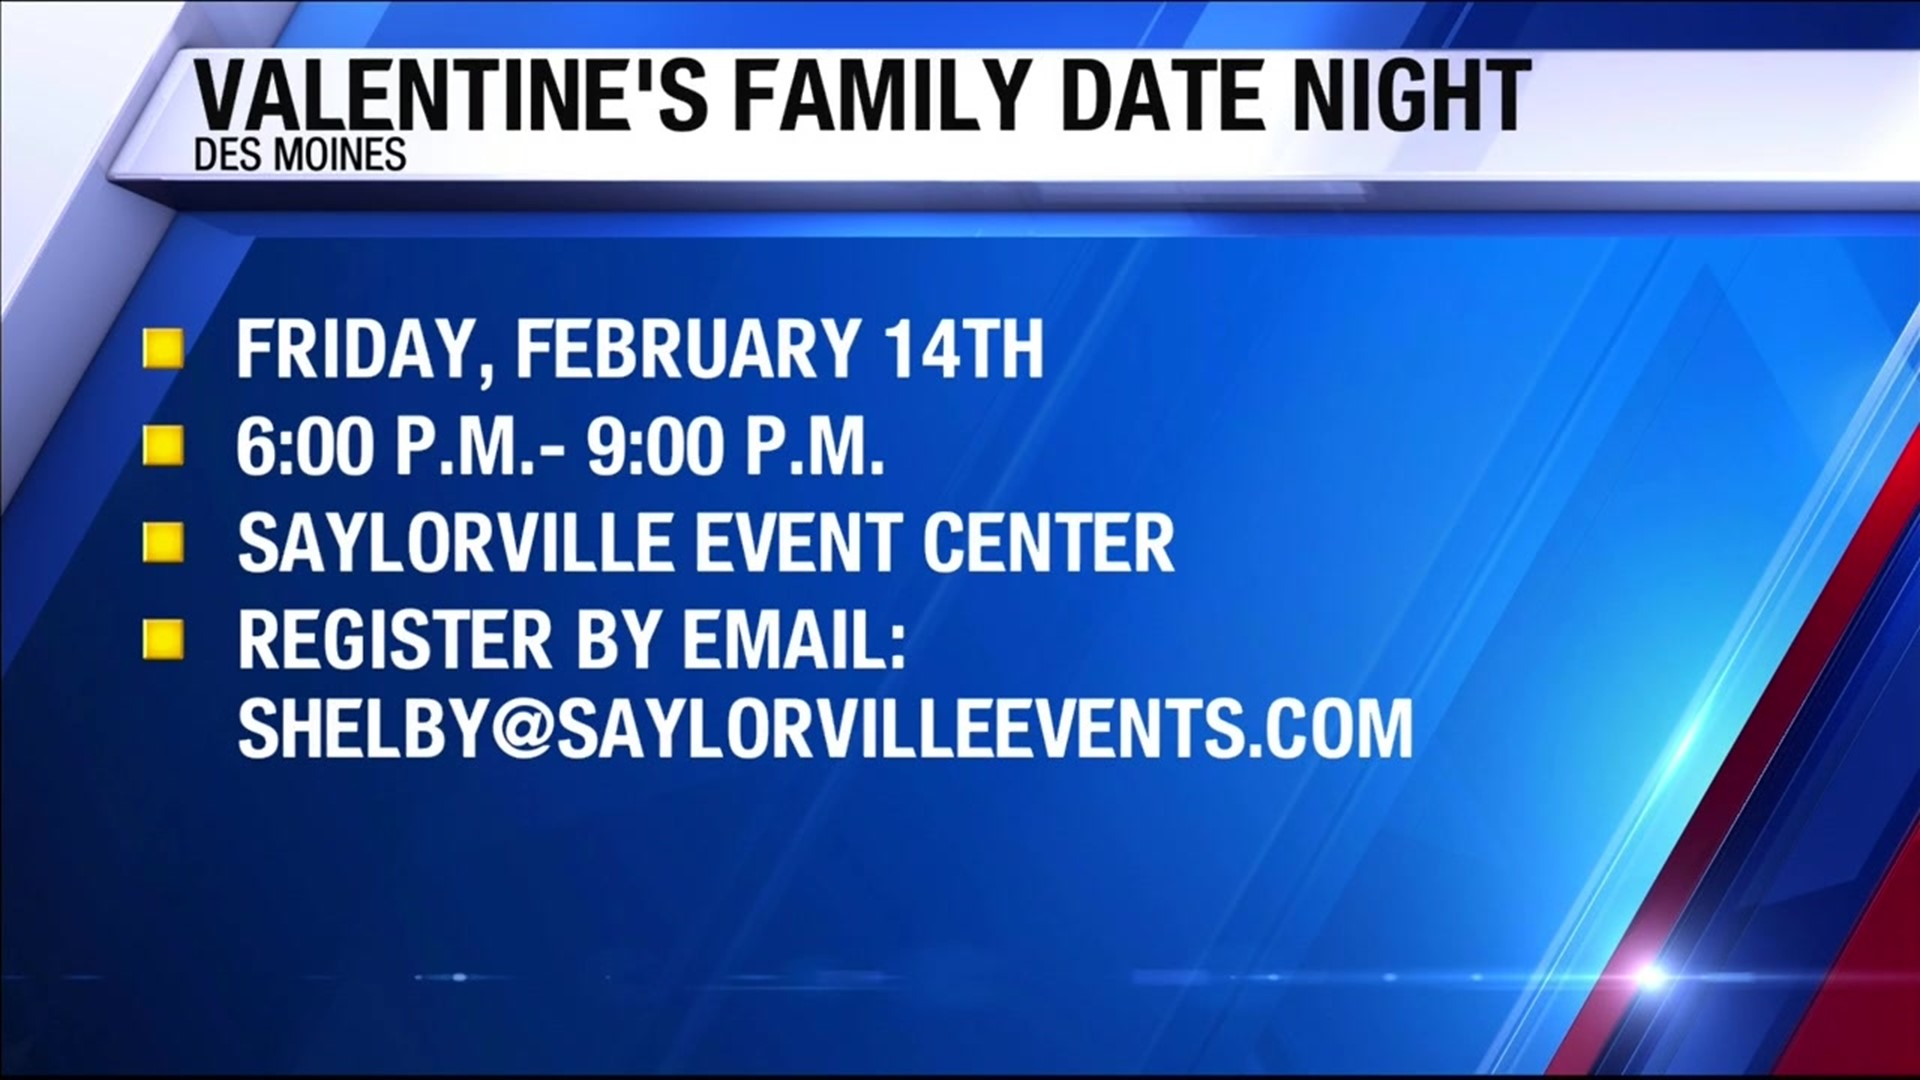 Valentine's Family Date Night is this Friday, February 14th